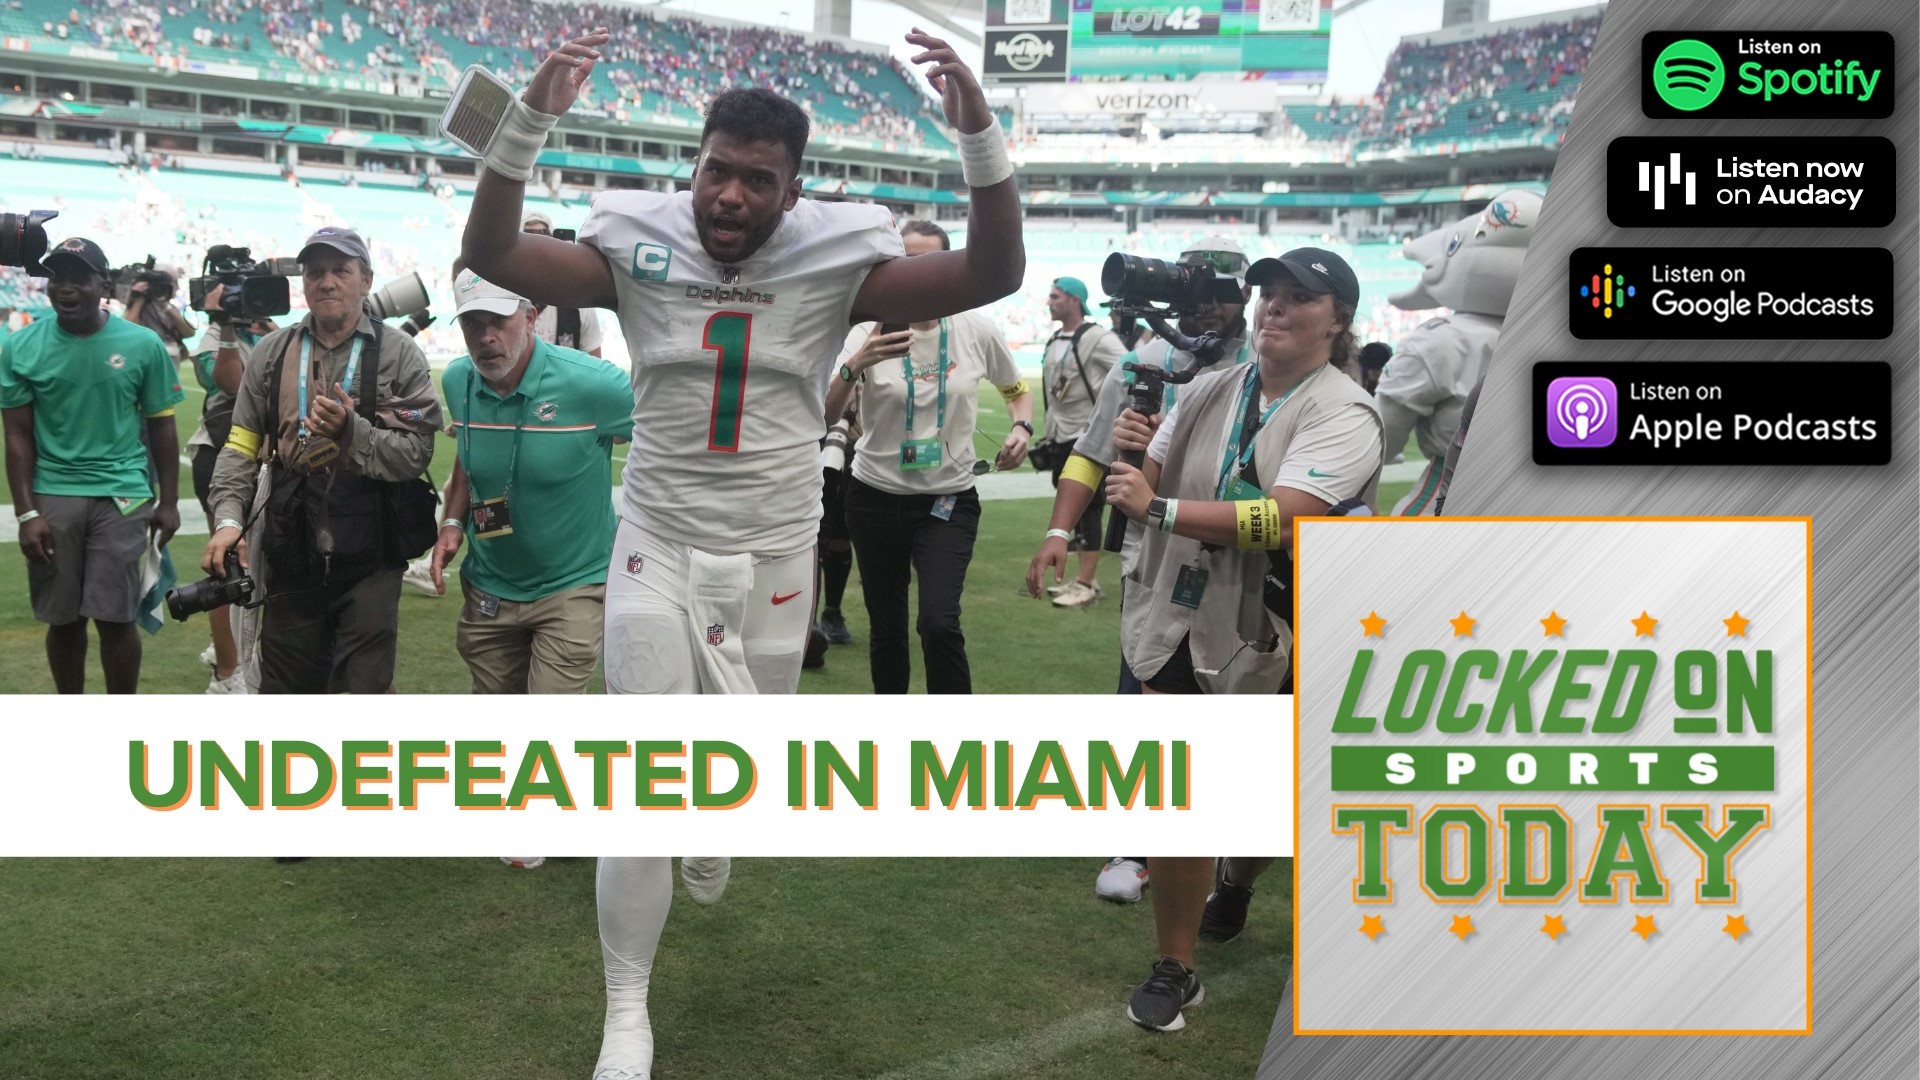 Discussing the day's top sports stories from the Miami Dolphins having a hot start to the NFL season to possible trouble for the Tampa Bay Bucaneers.